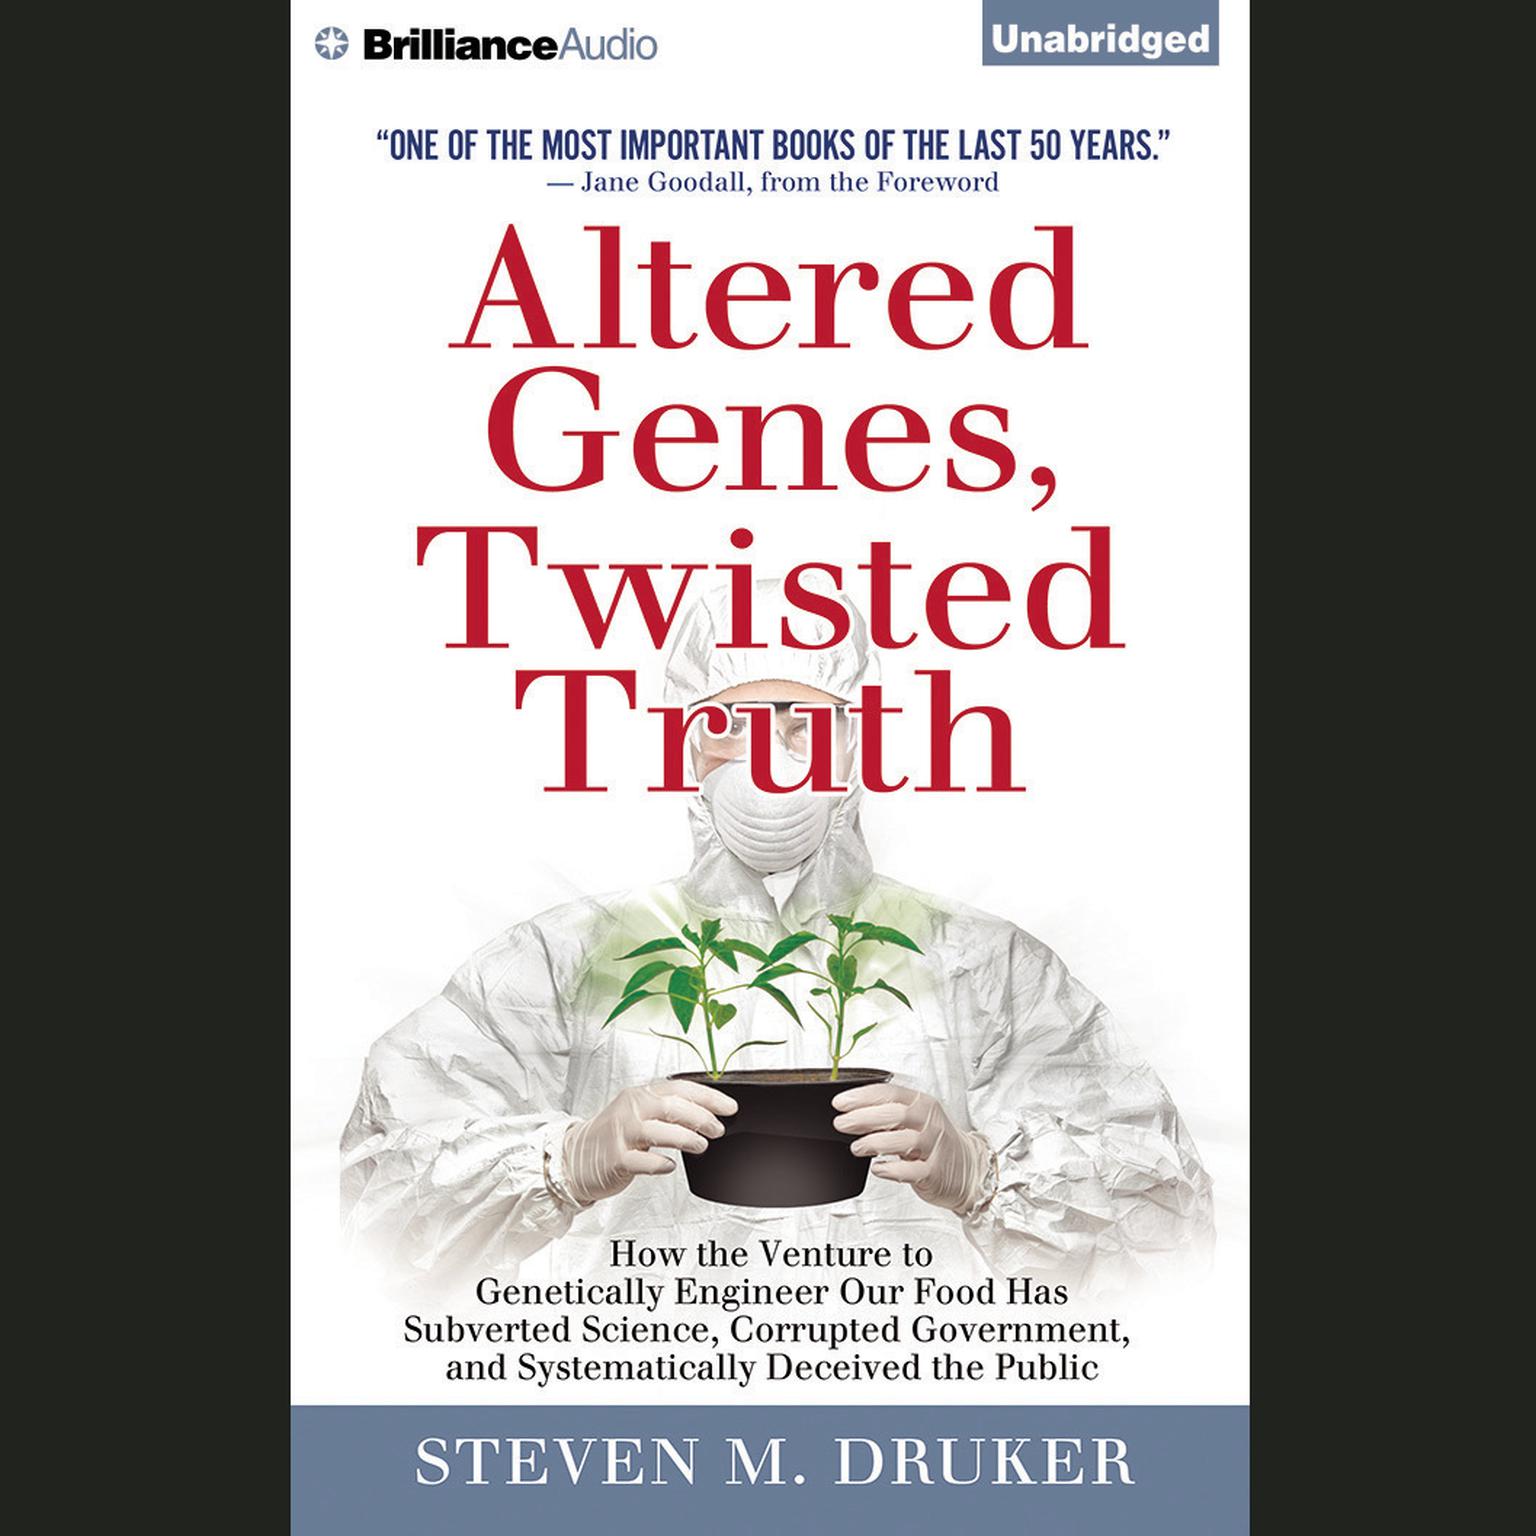 Altered Genes, Twisted Truth: How the Venture to Genetically Engineer Our Food Has Subverted Science, Corrupted Government, and Systematically Deceived the Public Audiobook, by Steven M. Druker